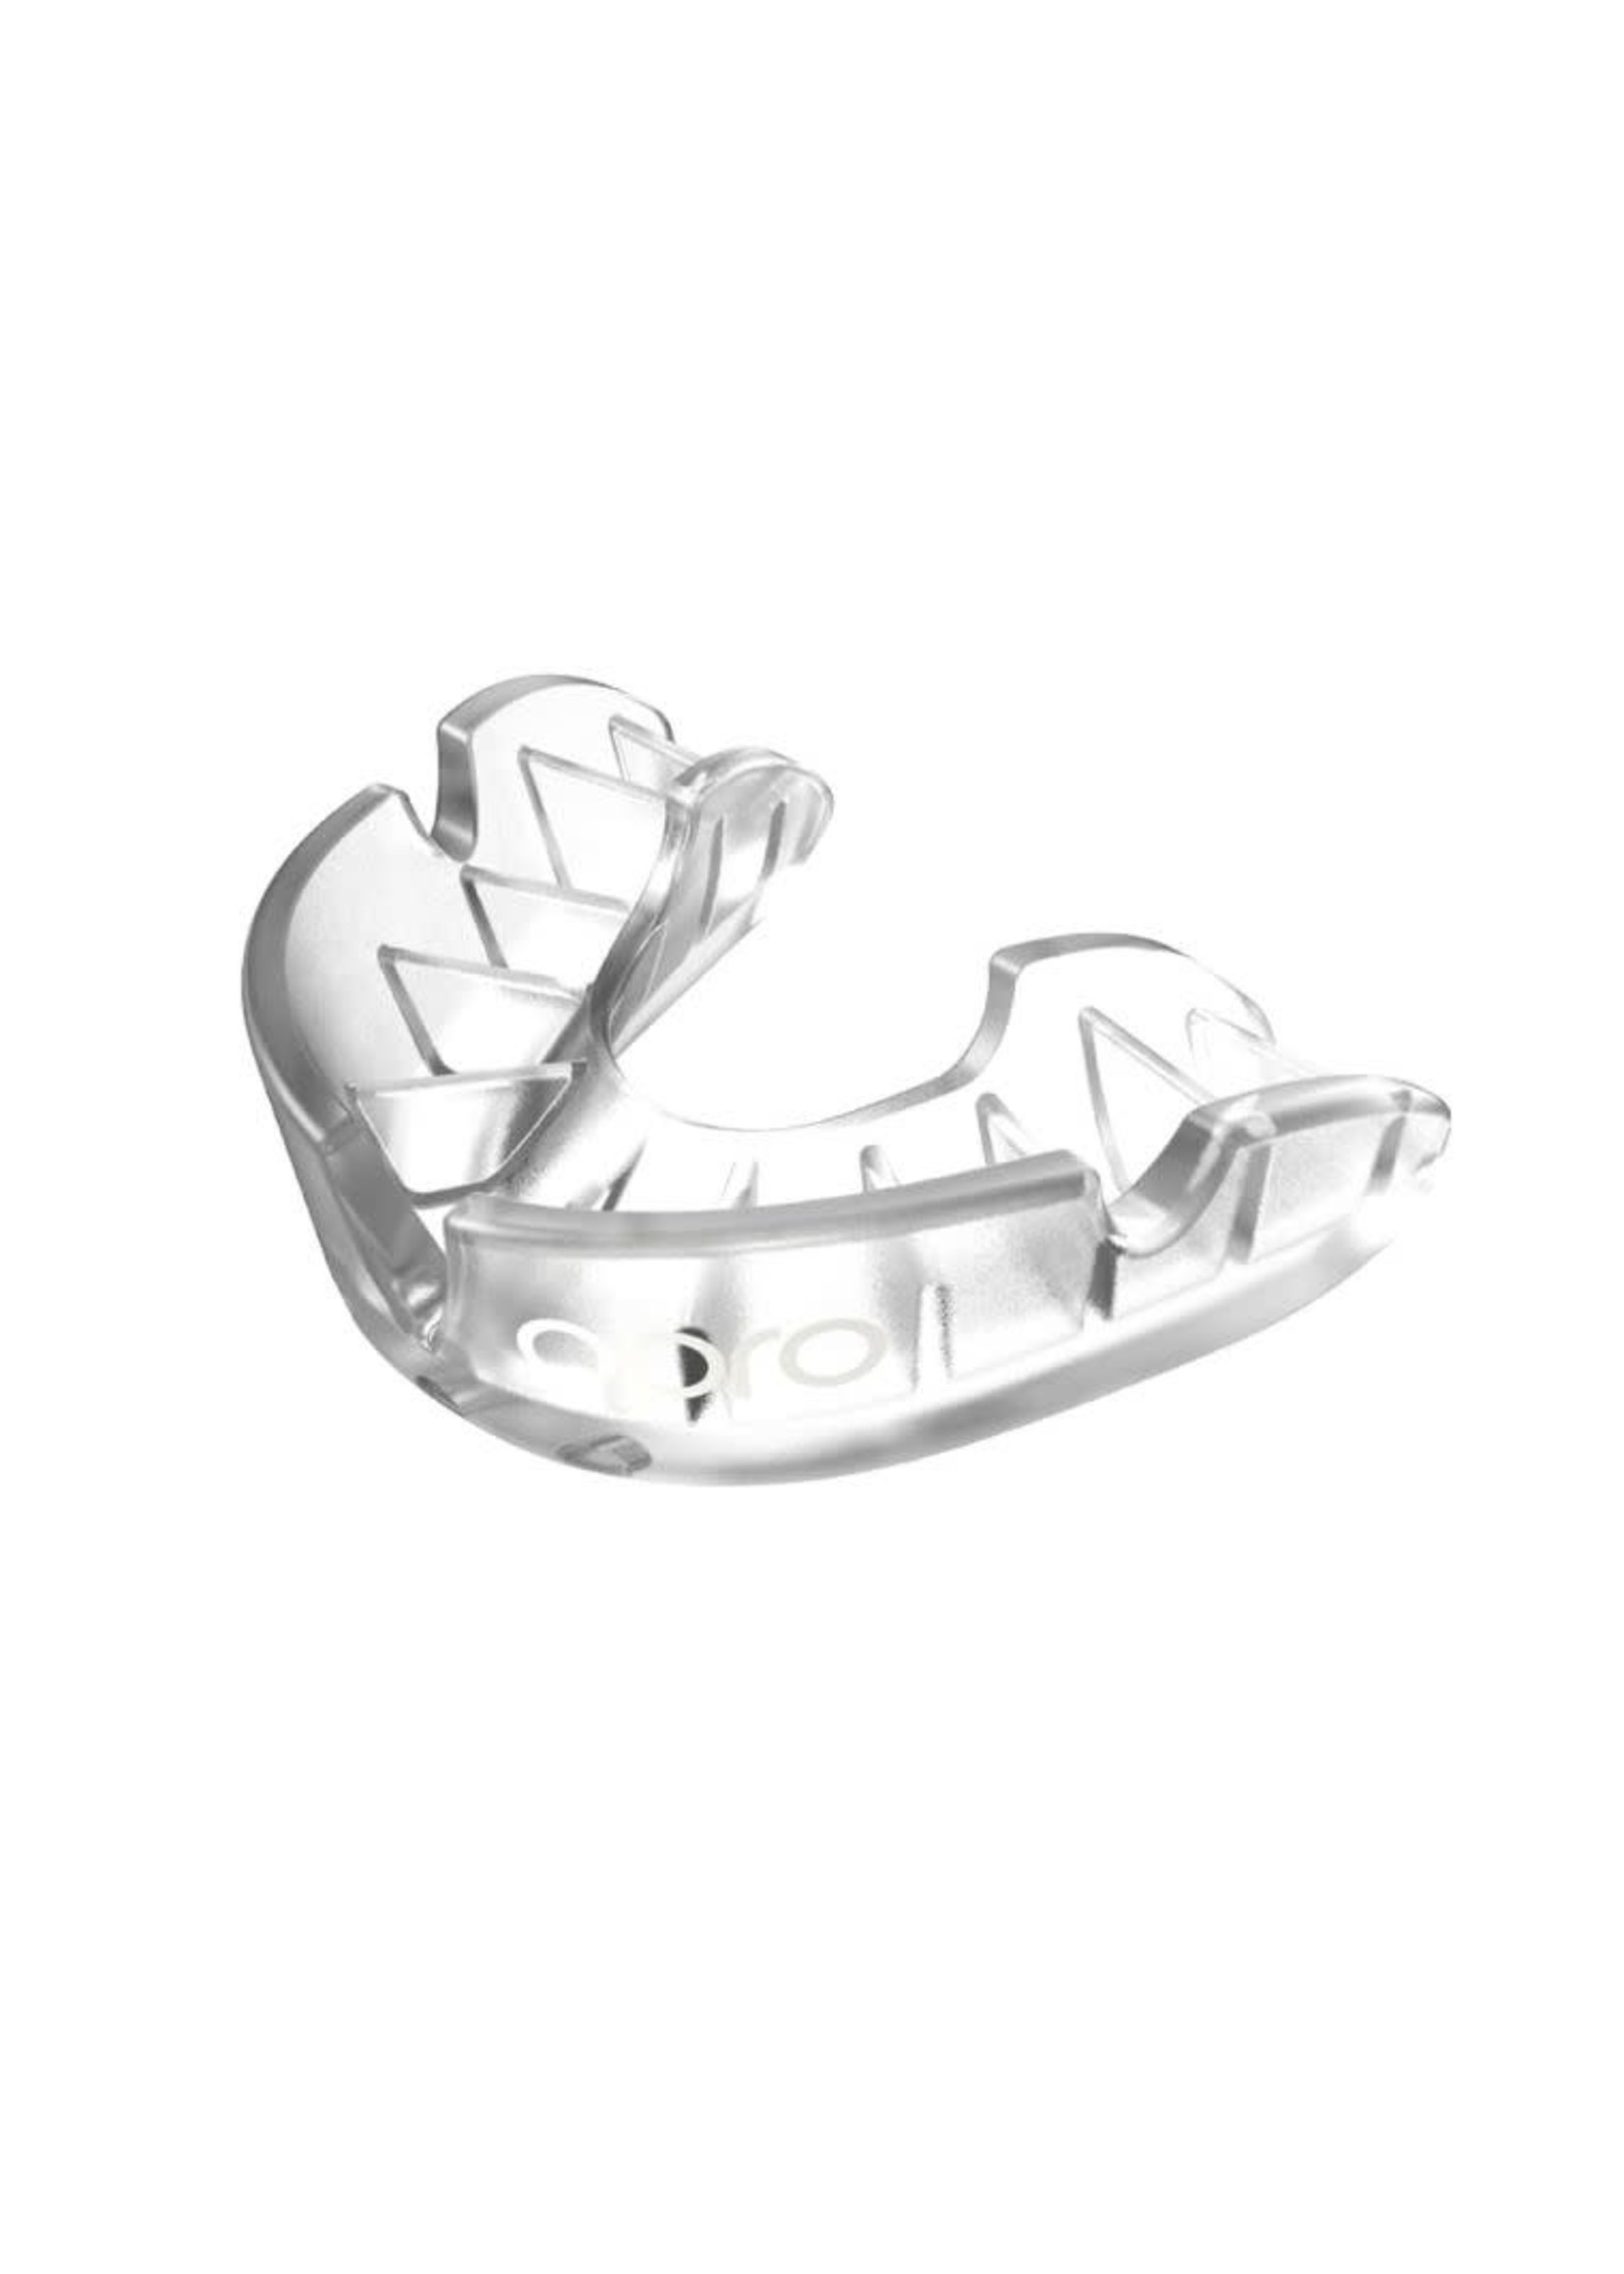 Opro Opro Silver Mouthguard with Fitting Cage